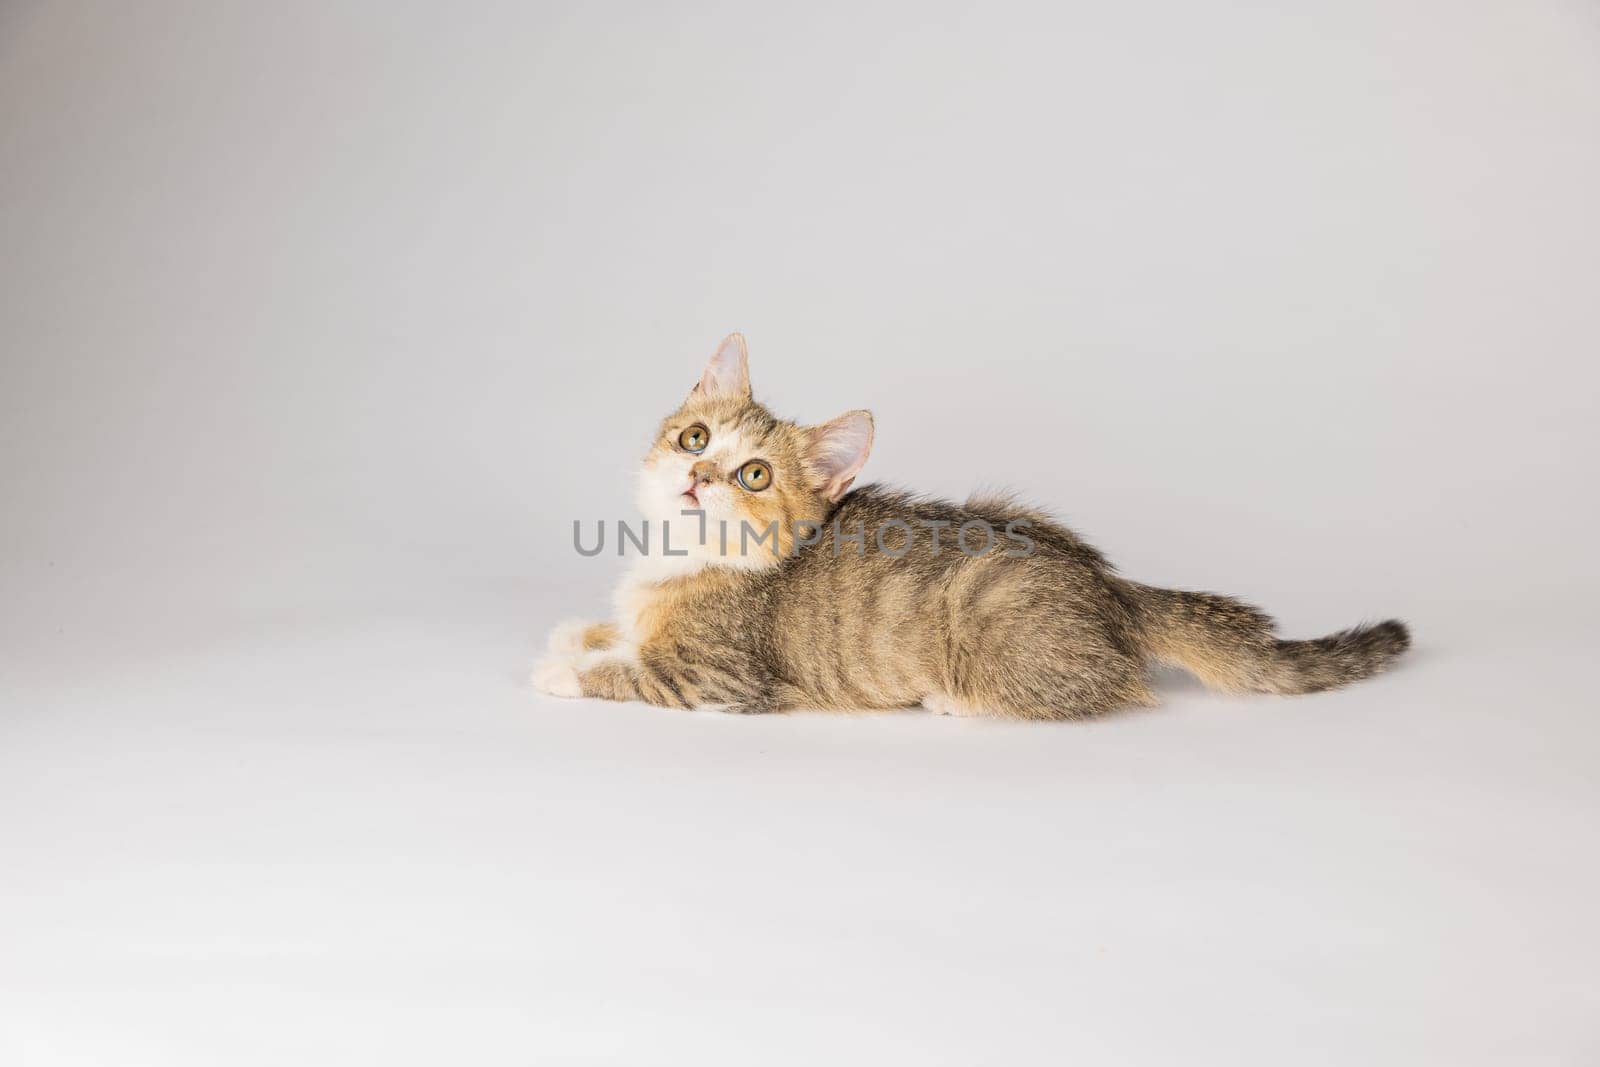 An isolated, beautiful little grey Scottish Fold kitten, looking playful and cheerful, is the focus of this cat portrait against a white background.